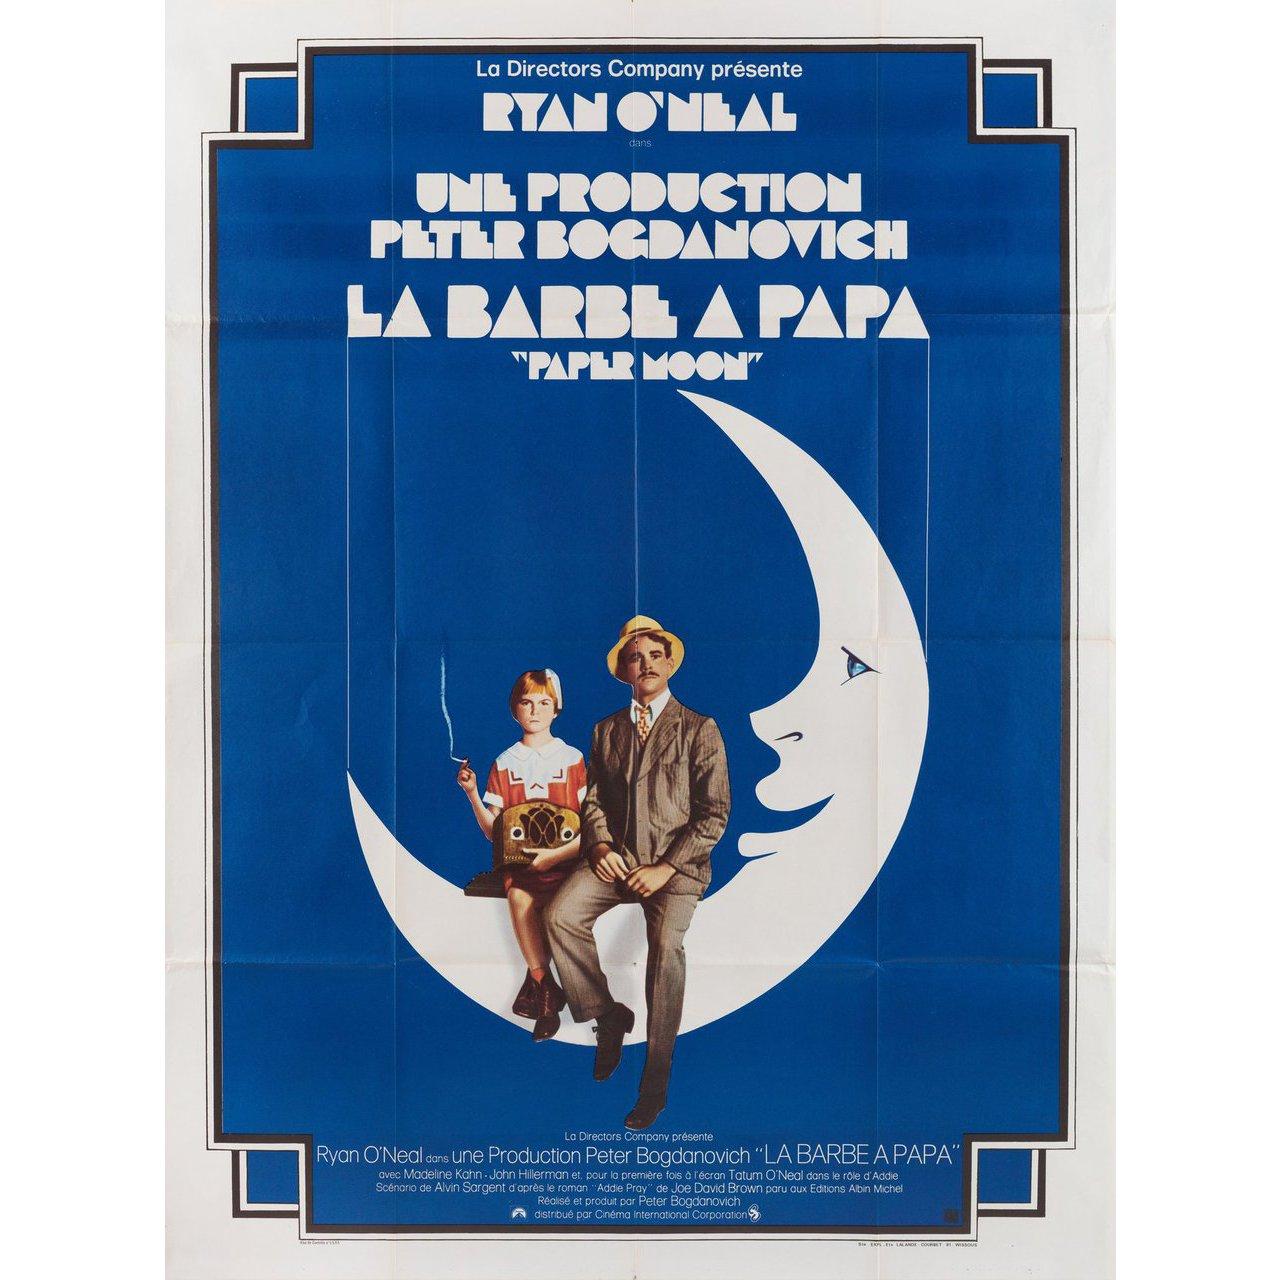 Original 1974 French grande poster for the first French theatrical release of the film Paper Moon directed by Peter Bogdanovich with Ryan O'Neal / Tatum O'Neal / Madeline Kahn / John Hillerman. Very Good-Fine condition, folded. Many original posters